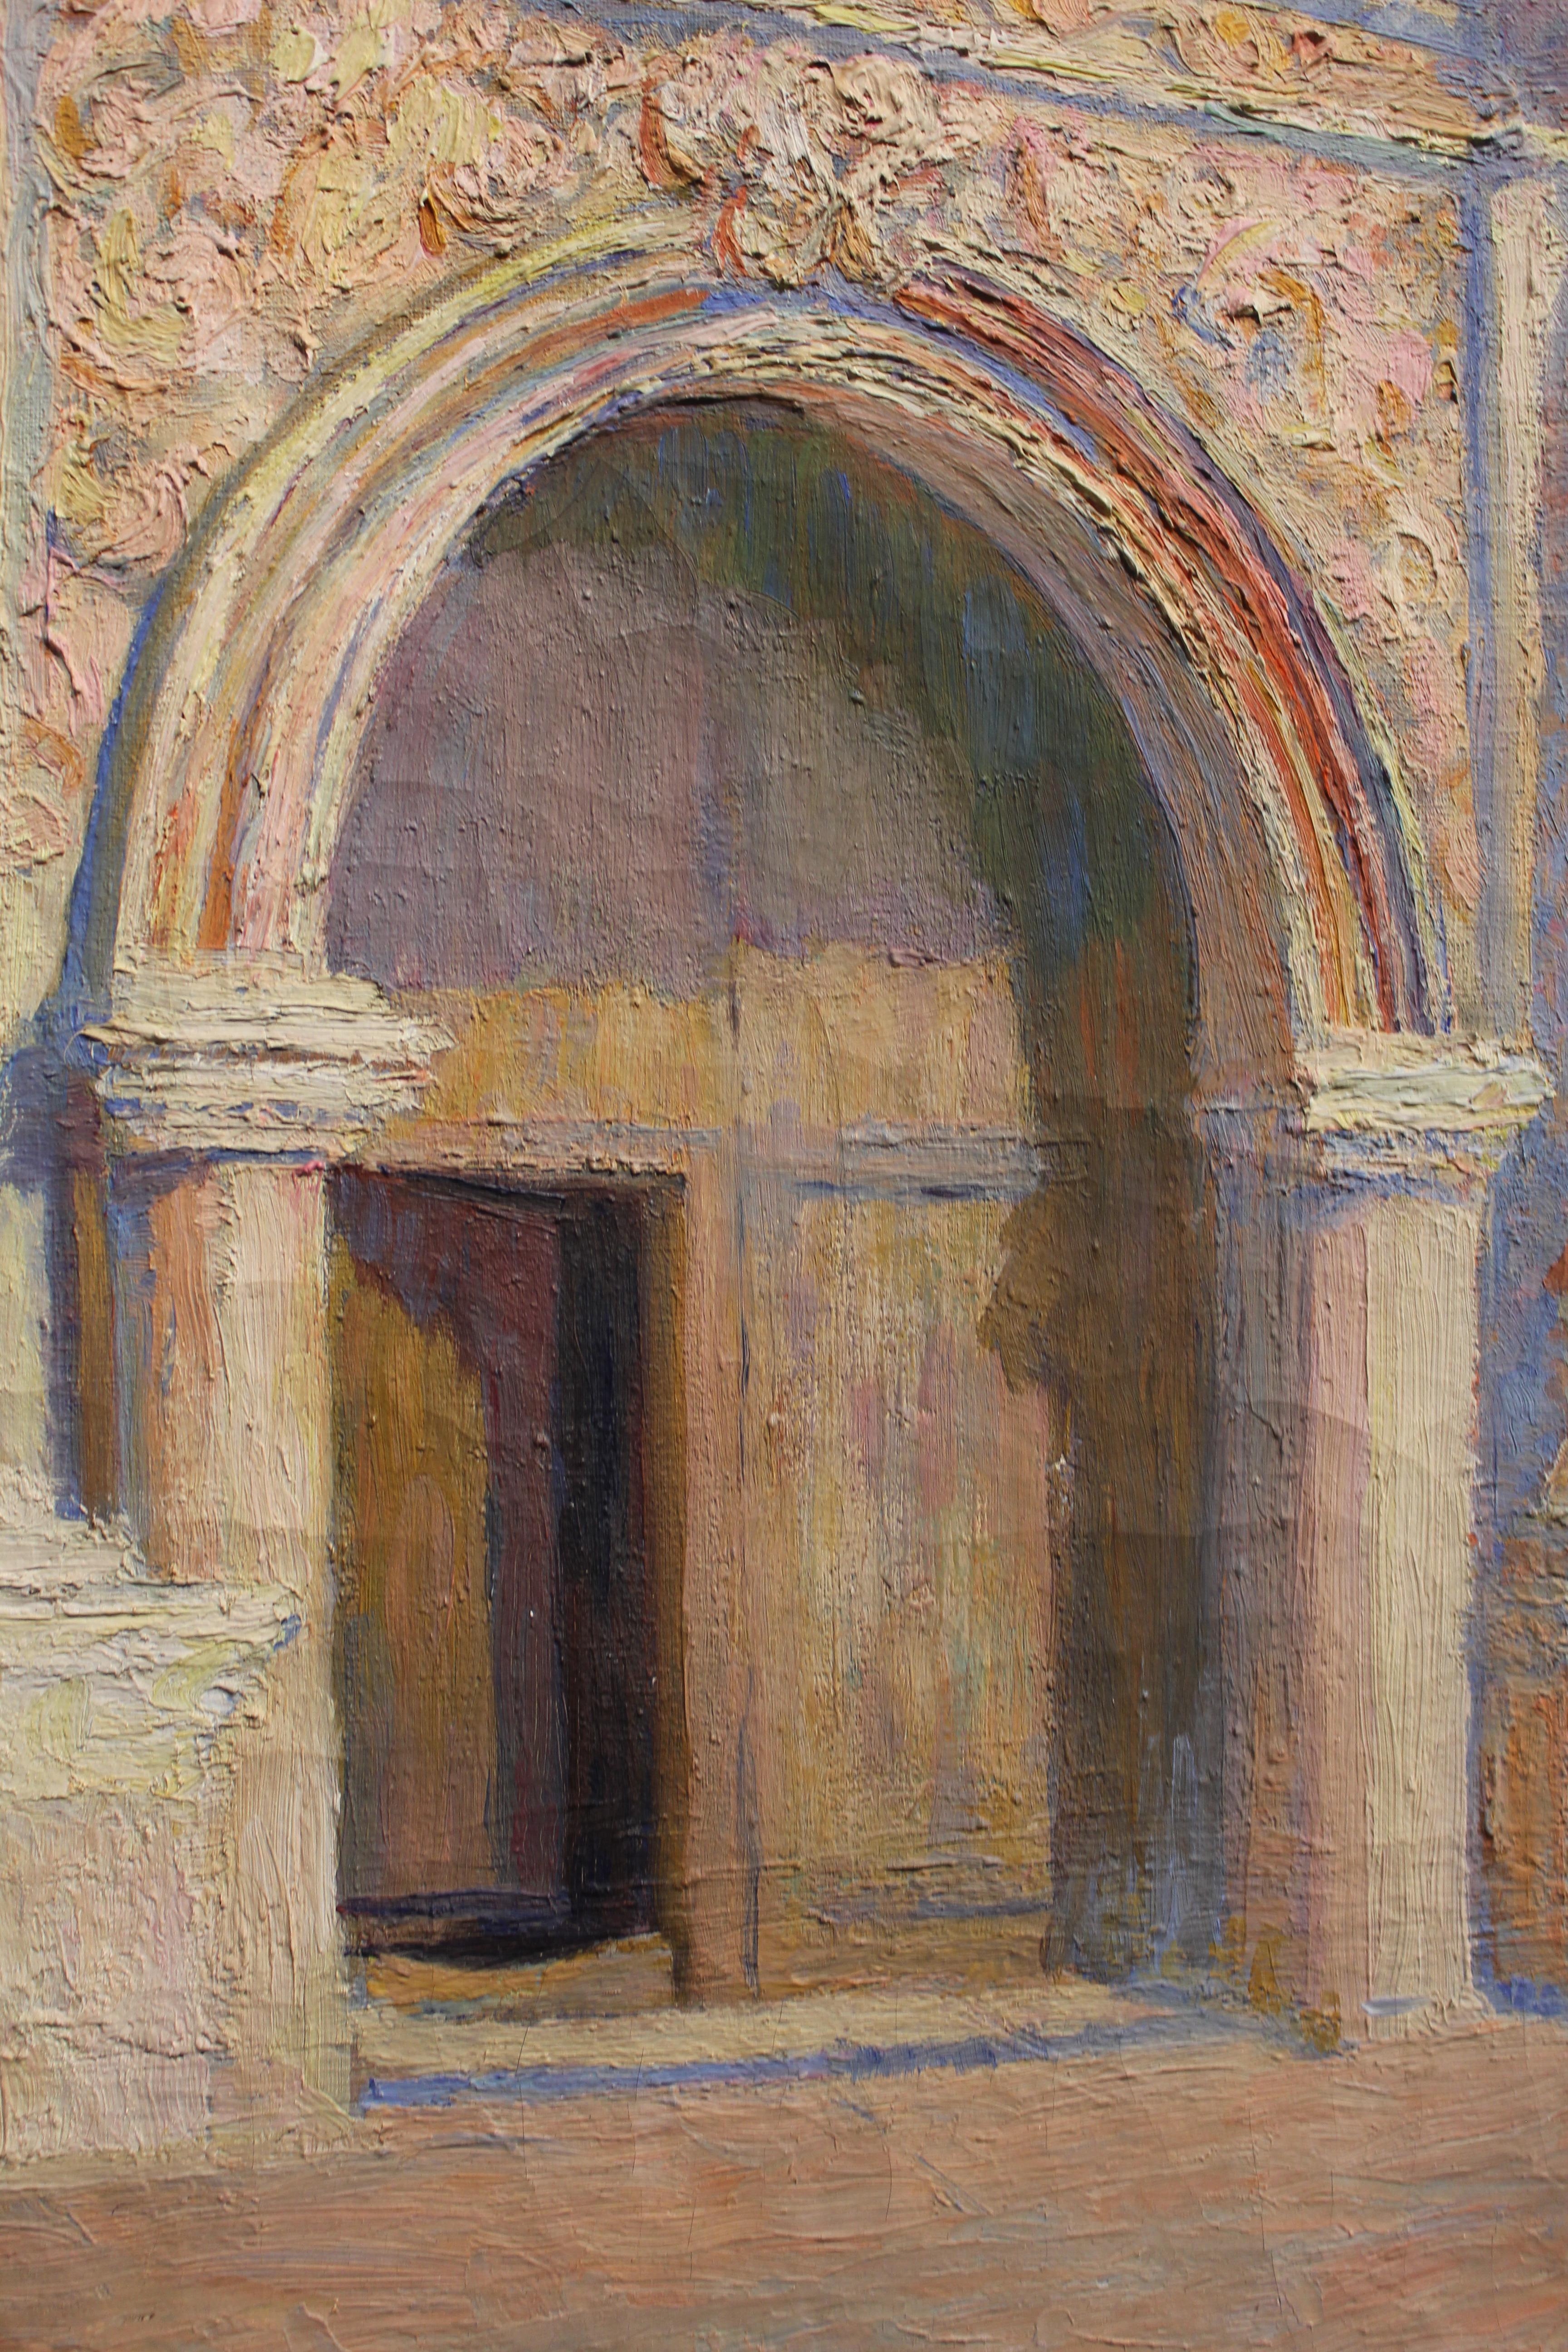 Italian or South American style Architectural painting of a chapel entrance. The painting is in brown, blue, and pink tones. It has details of sculptures and carved formations on the chapel. It is signed by the artist in the bottom right corner. The